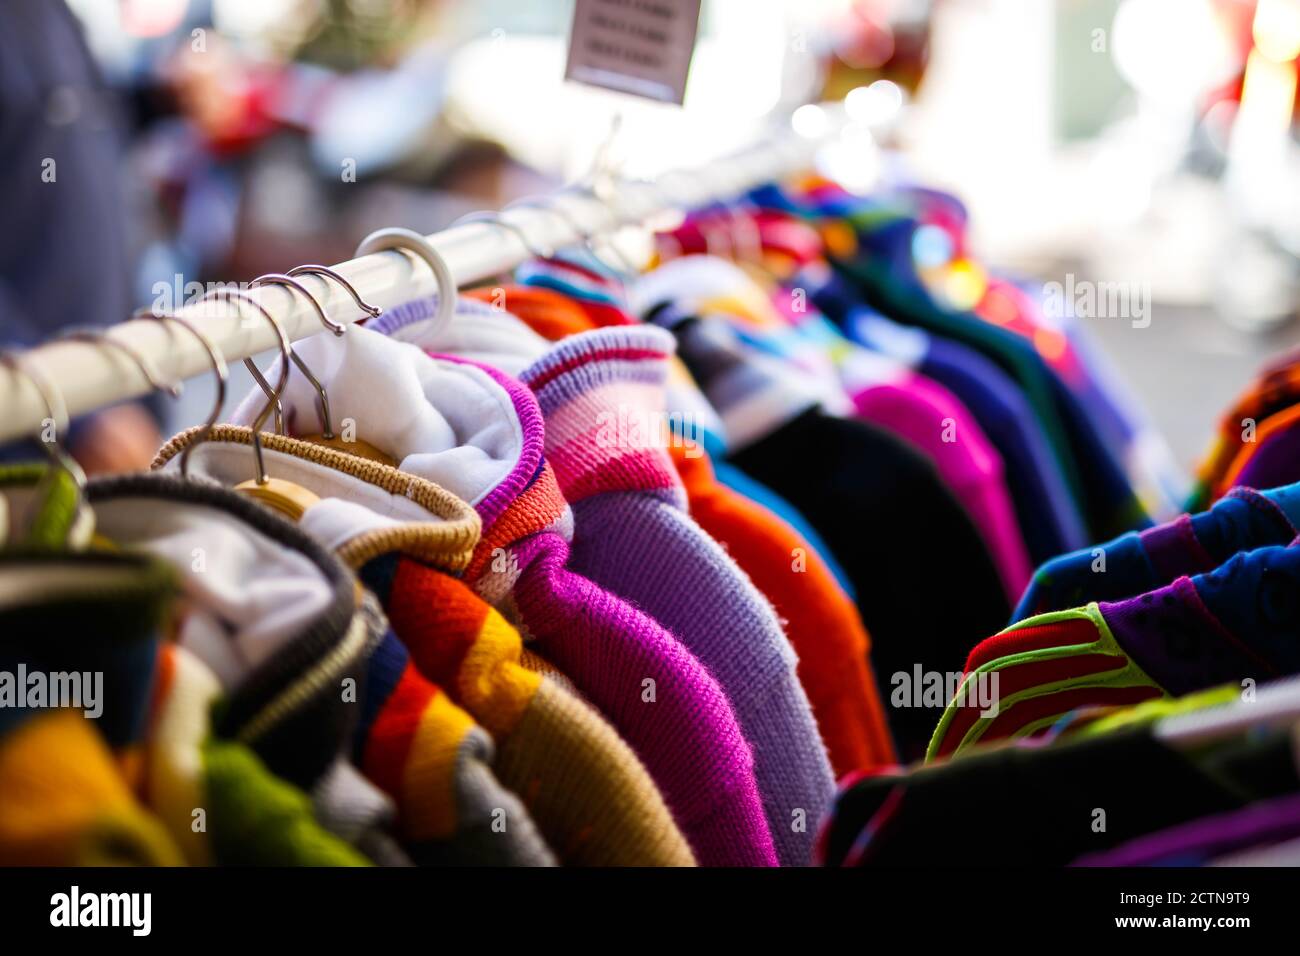 Closeup shot of colorful winter clothes hanging on the rack Stock Photo